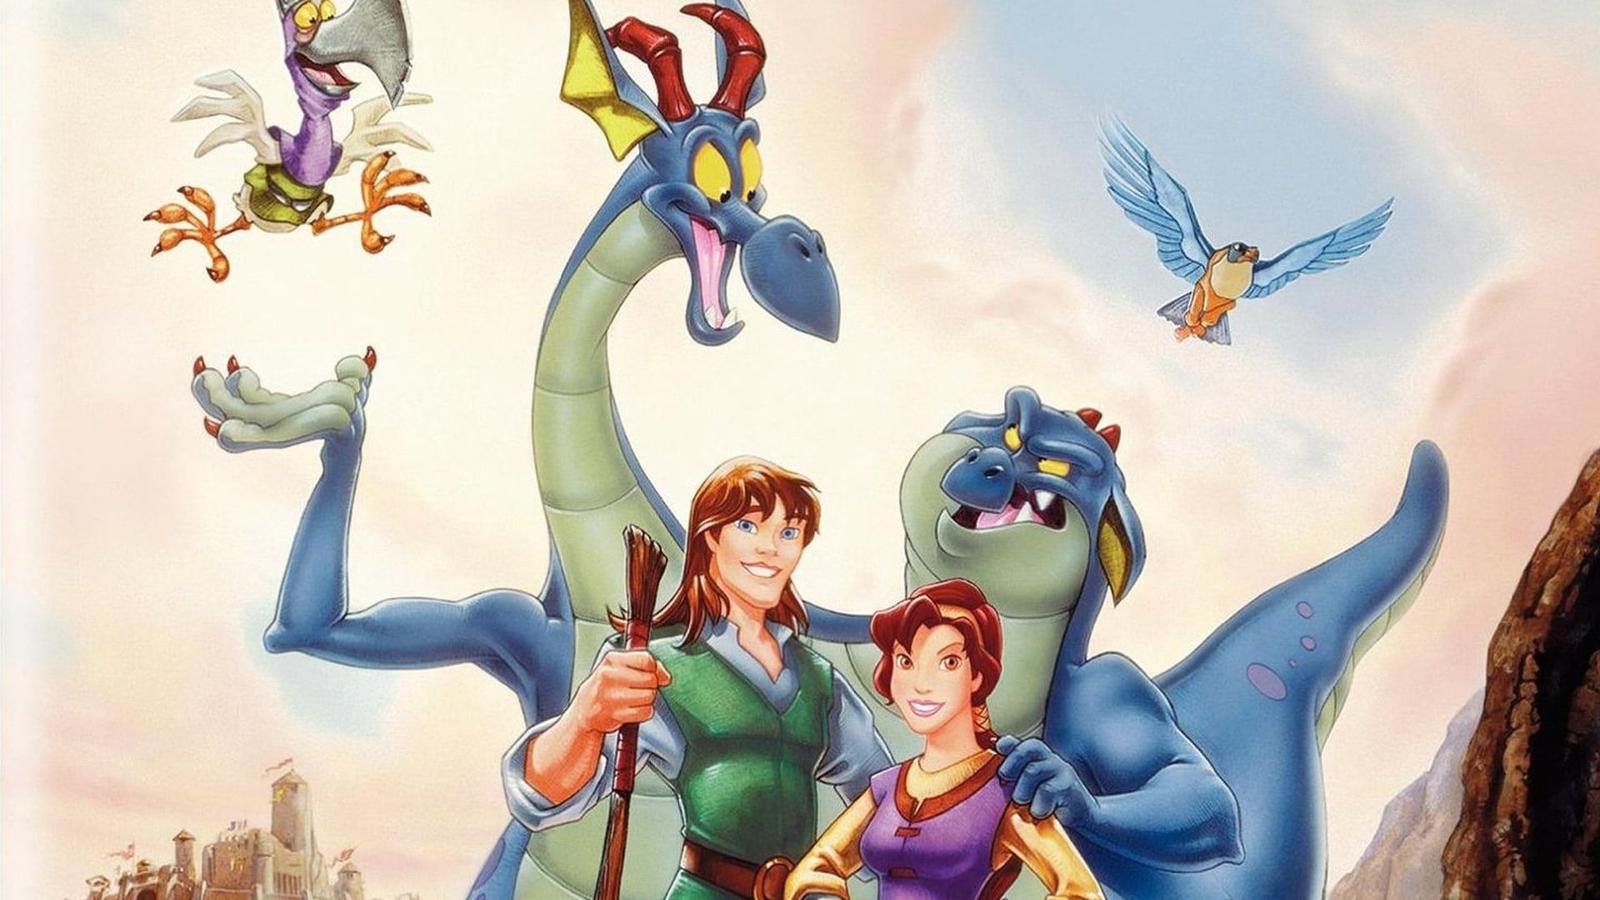 Non Disney Animated Movies Quest for Camelot